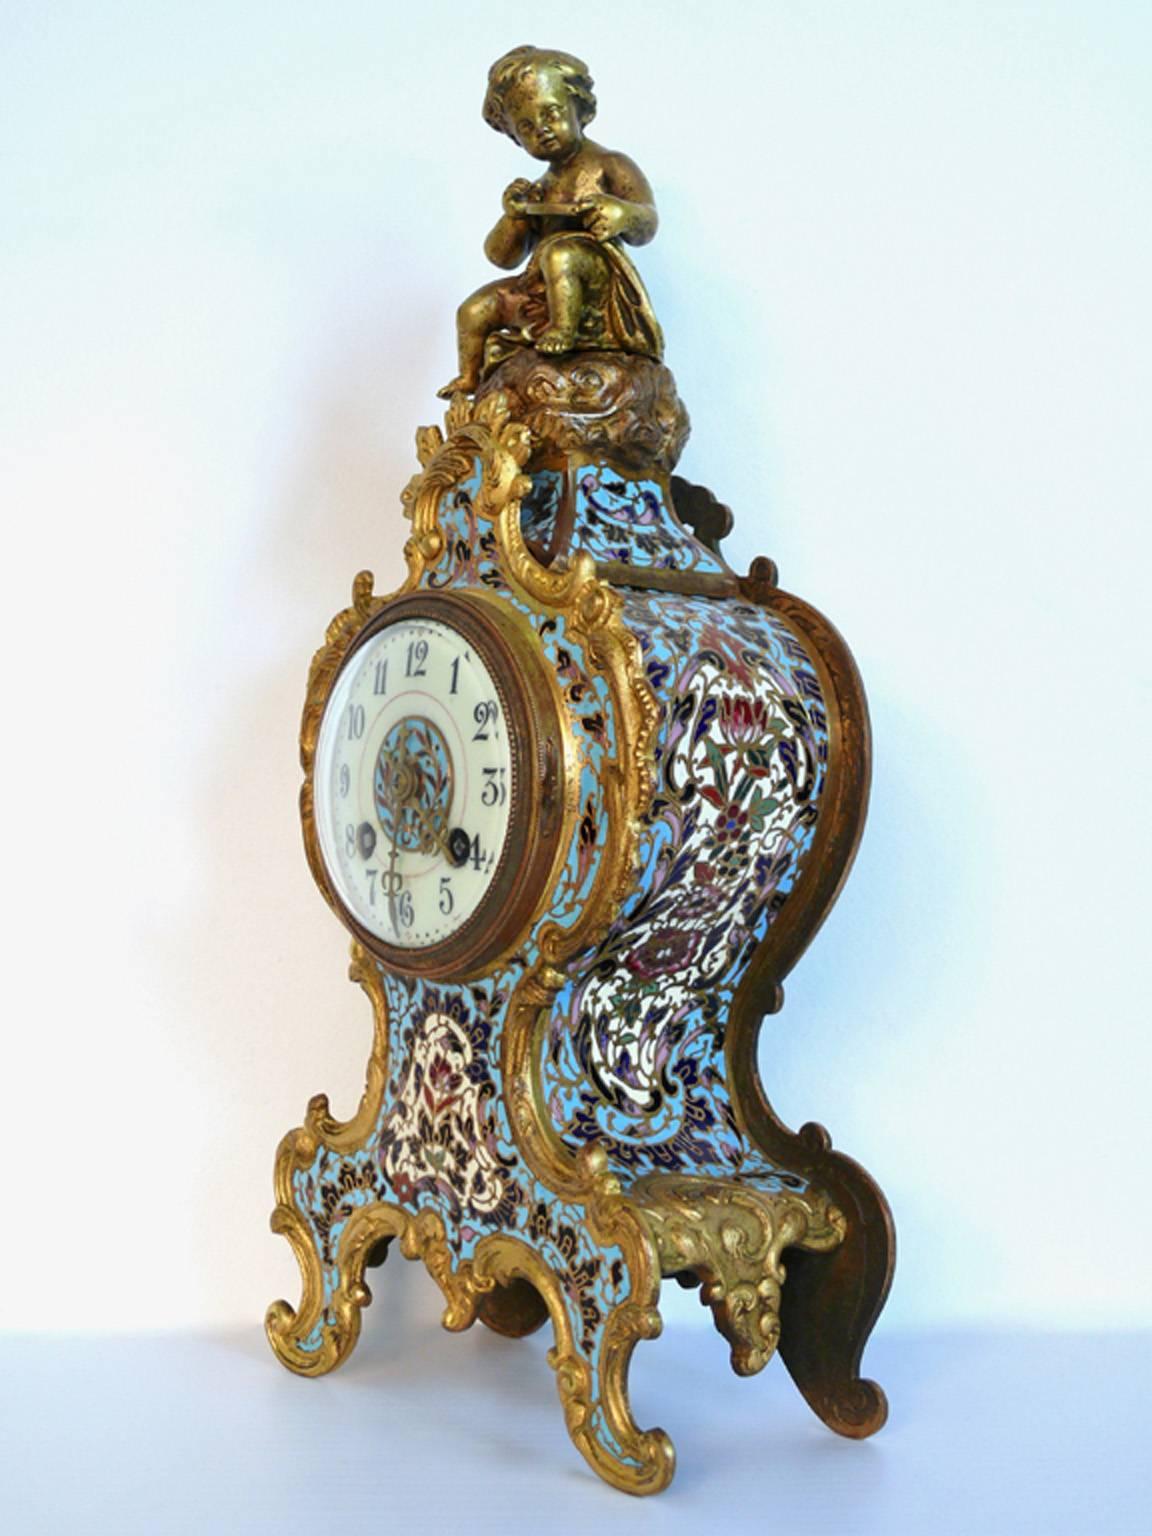 A fine gild gold ormolu and doré bronze French clock with cherub on top. Having the highest quality enamel work much like Russian Faberge in baby blue colors. Rare from with happy floral design. All original clock movement in tact.